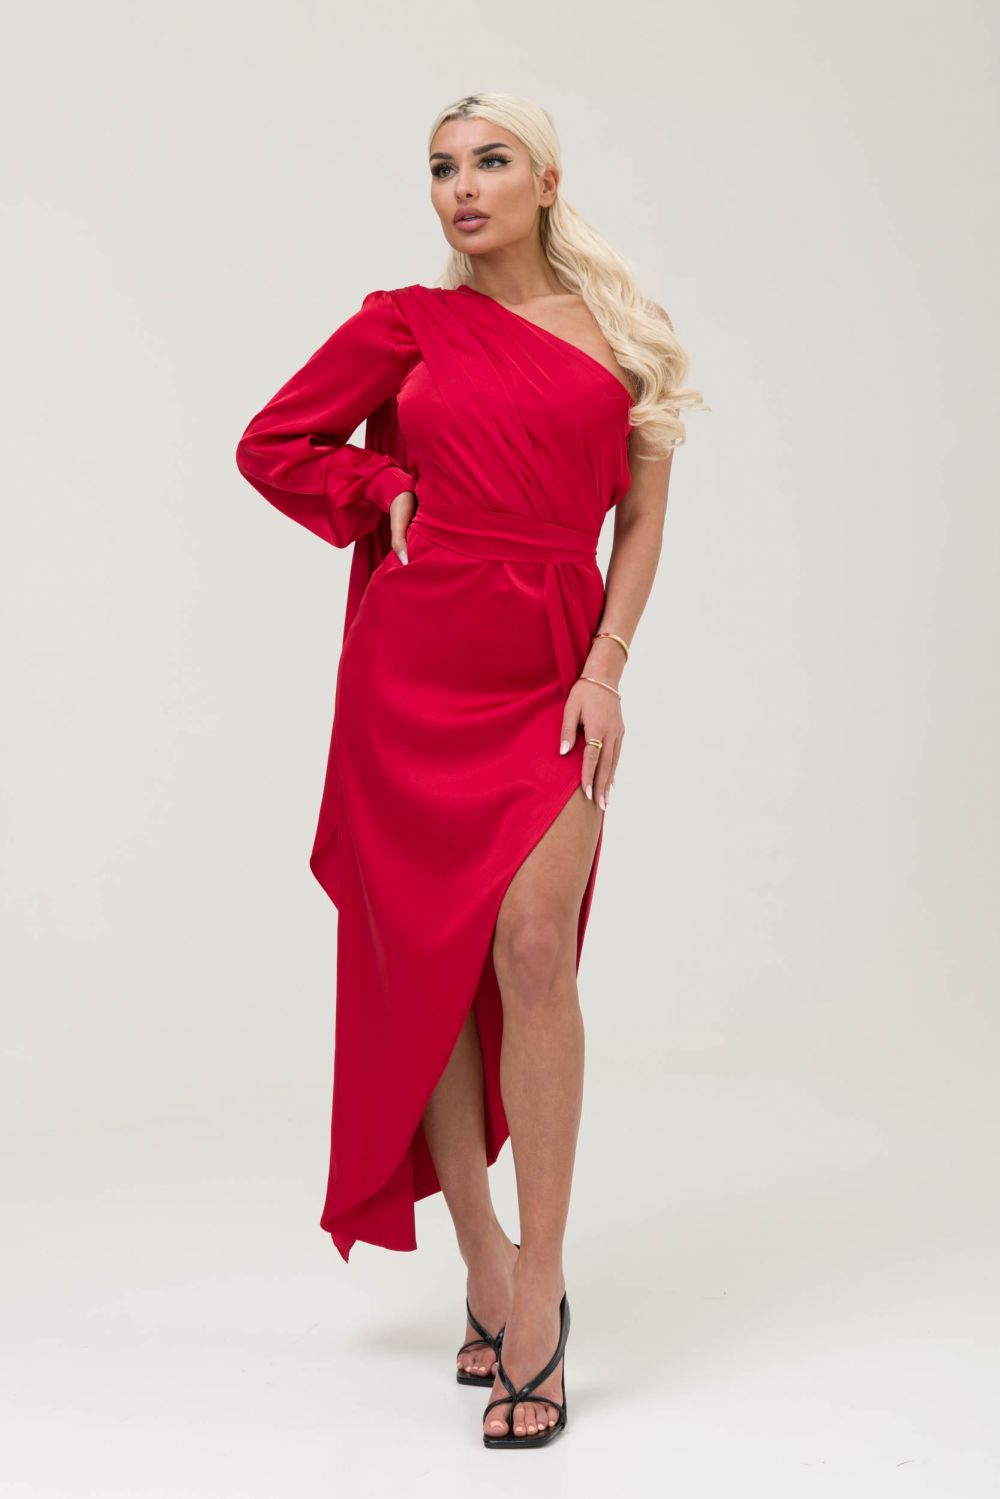 Long red satin veil dress for women by Standy Bogas